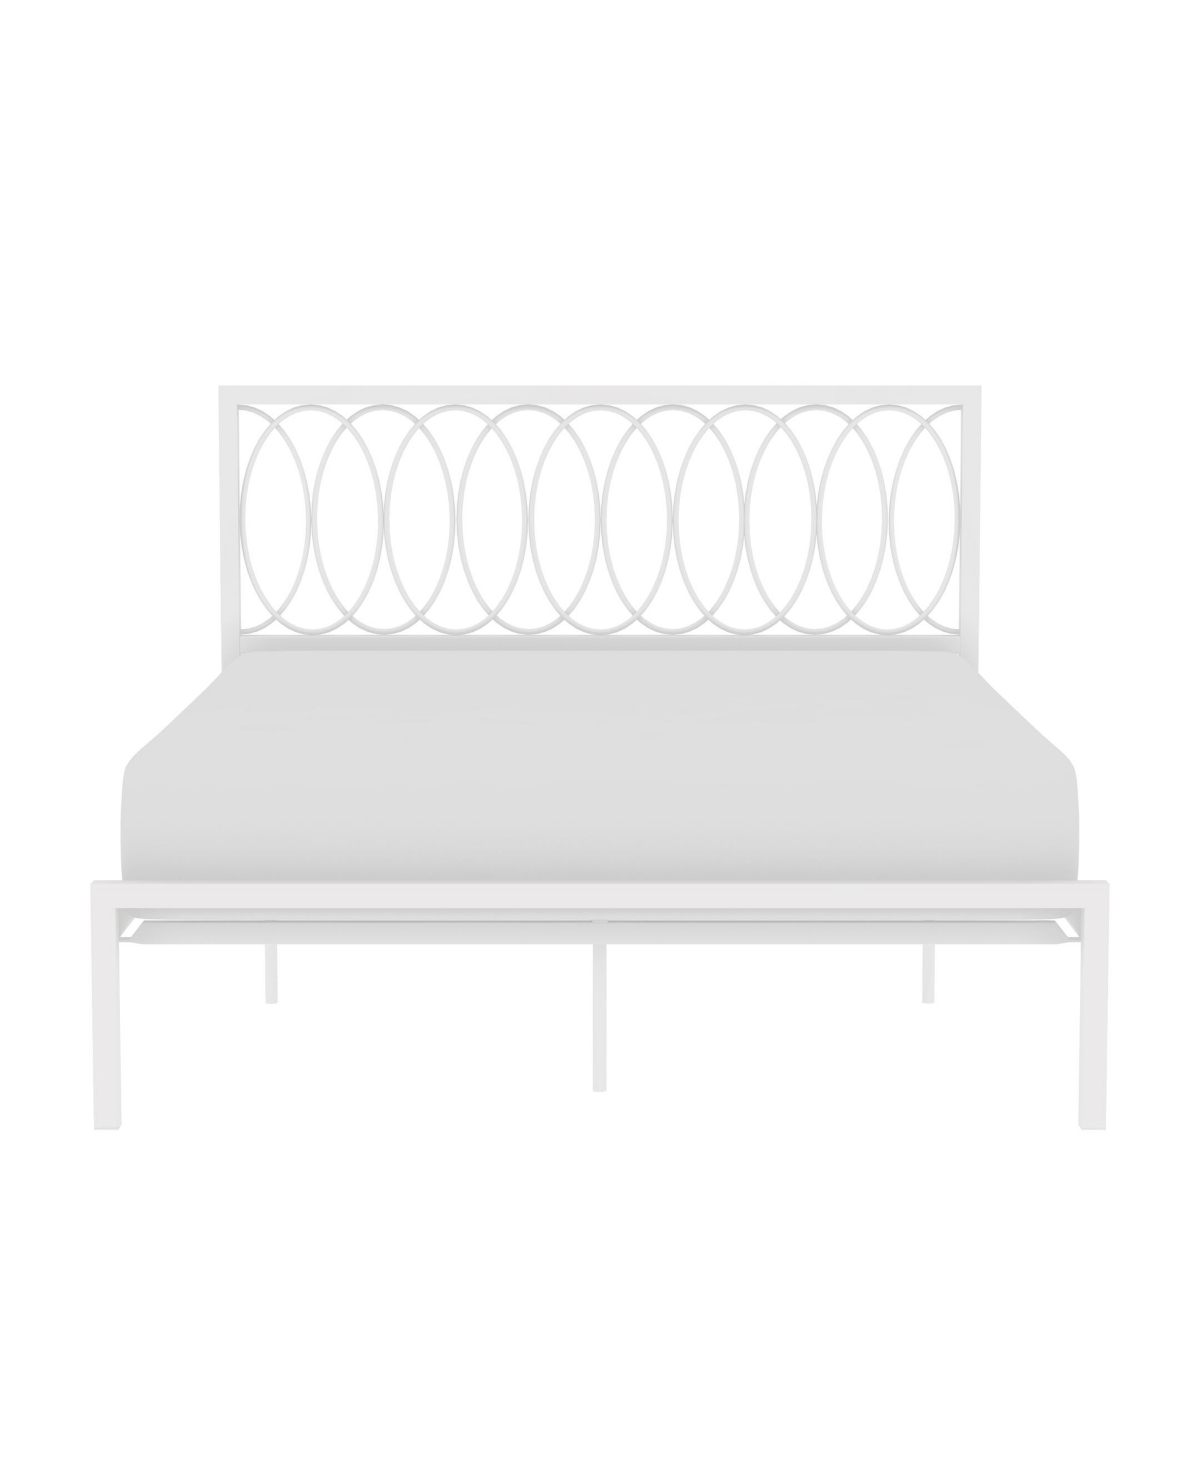 Hillsdale 44" Metal Naomi Furniture Queen Bed In White